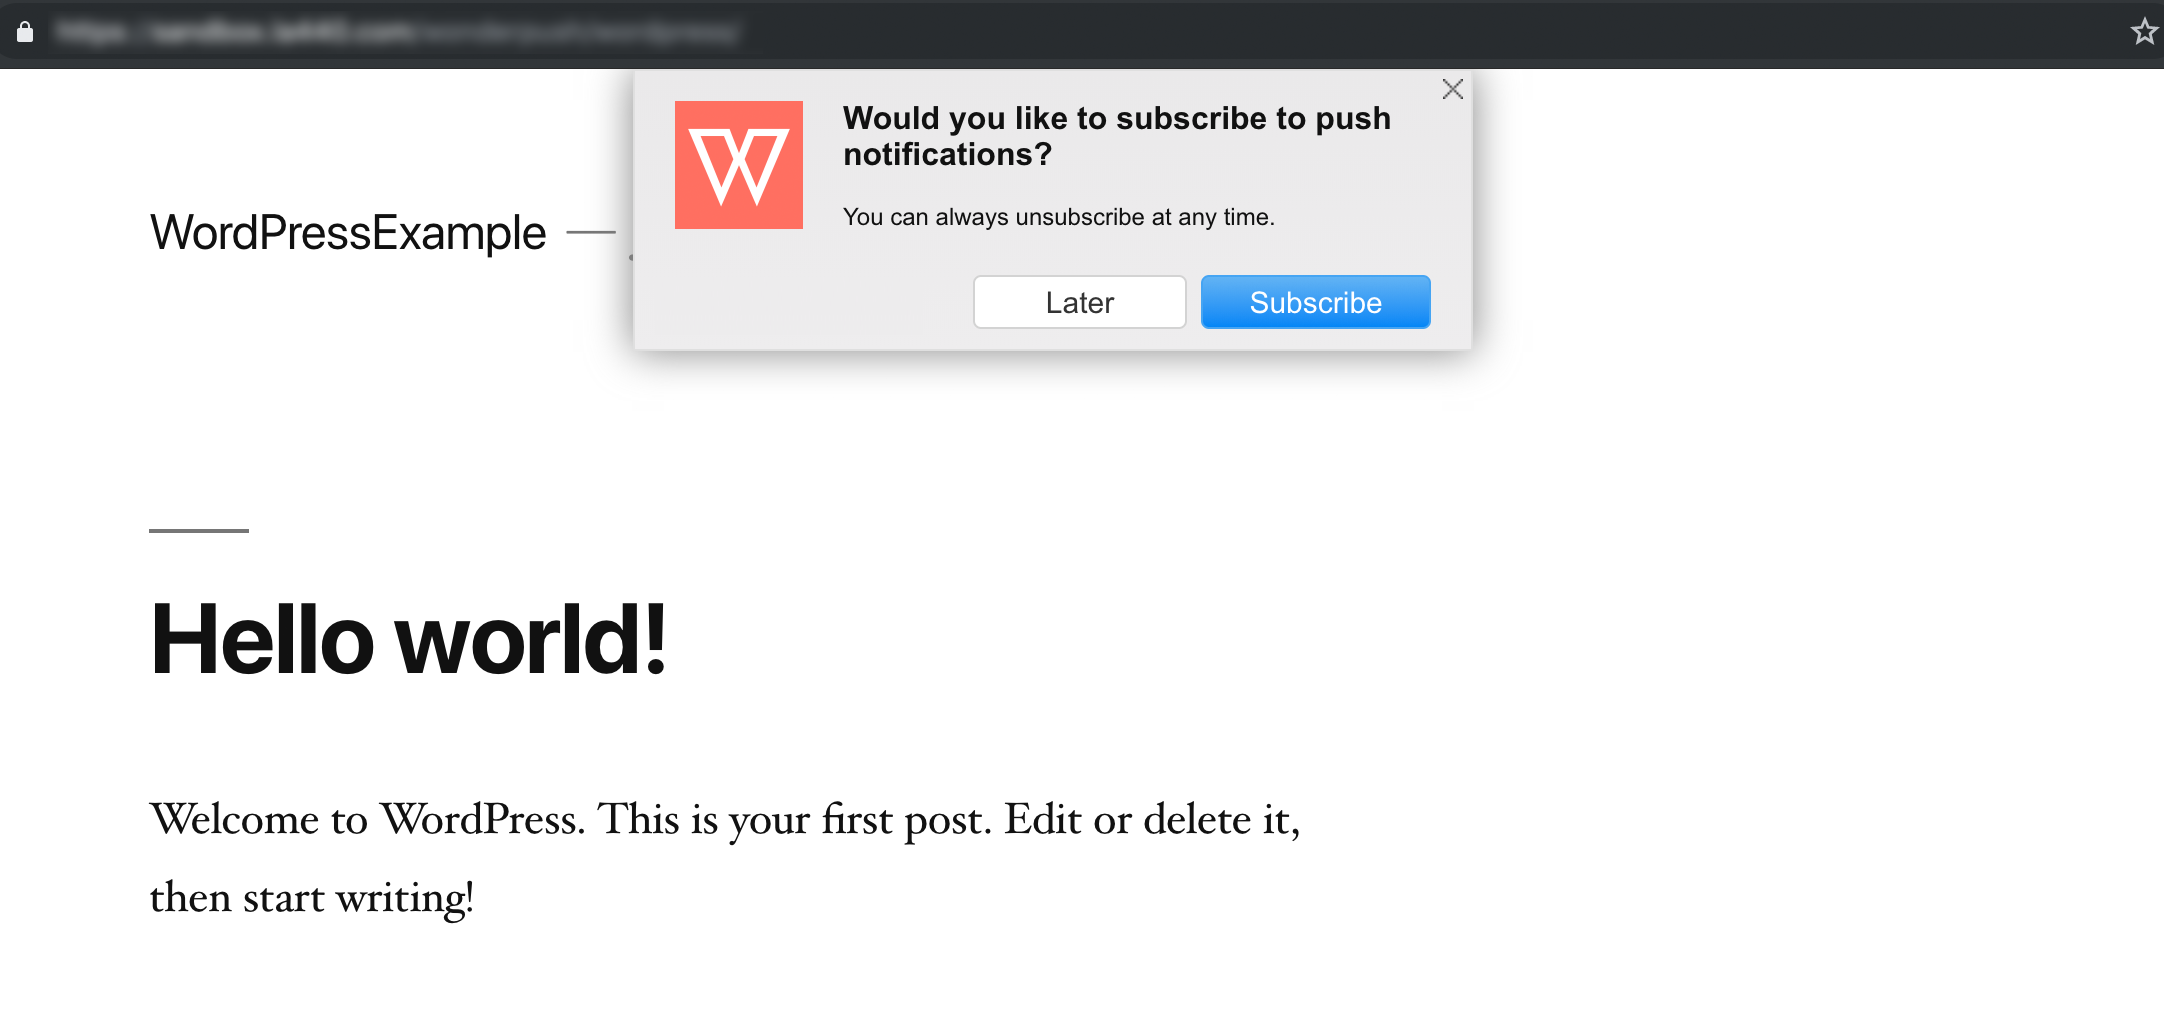 The subscription dialog on a WordPress example site